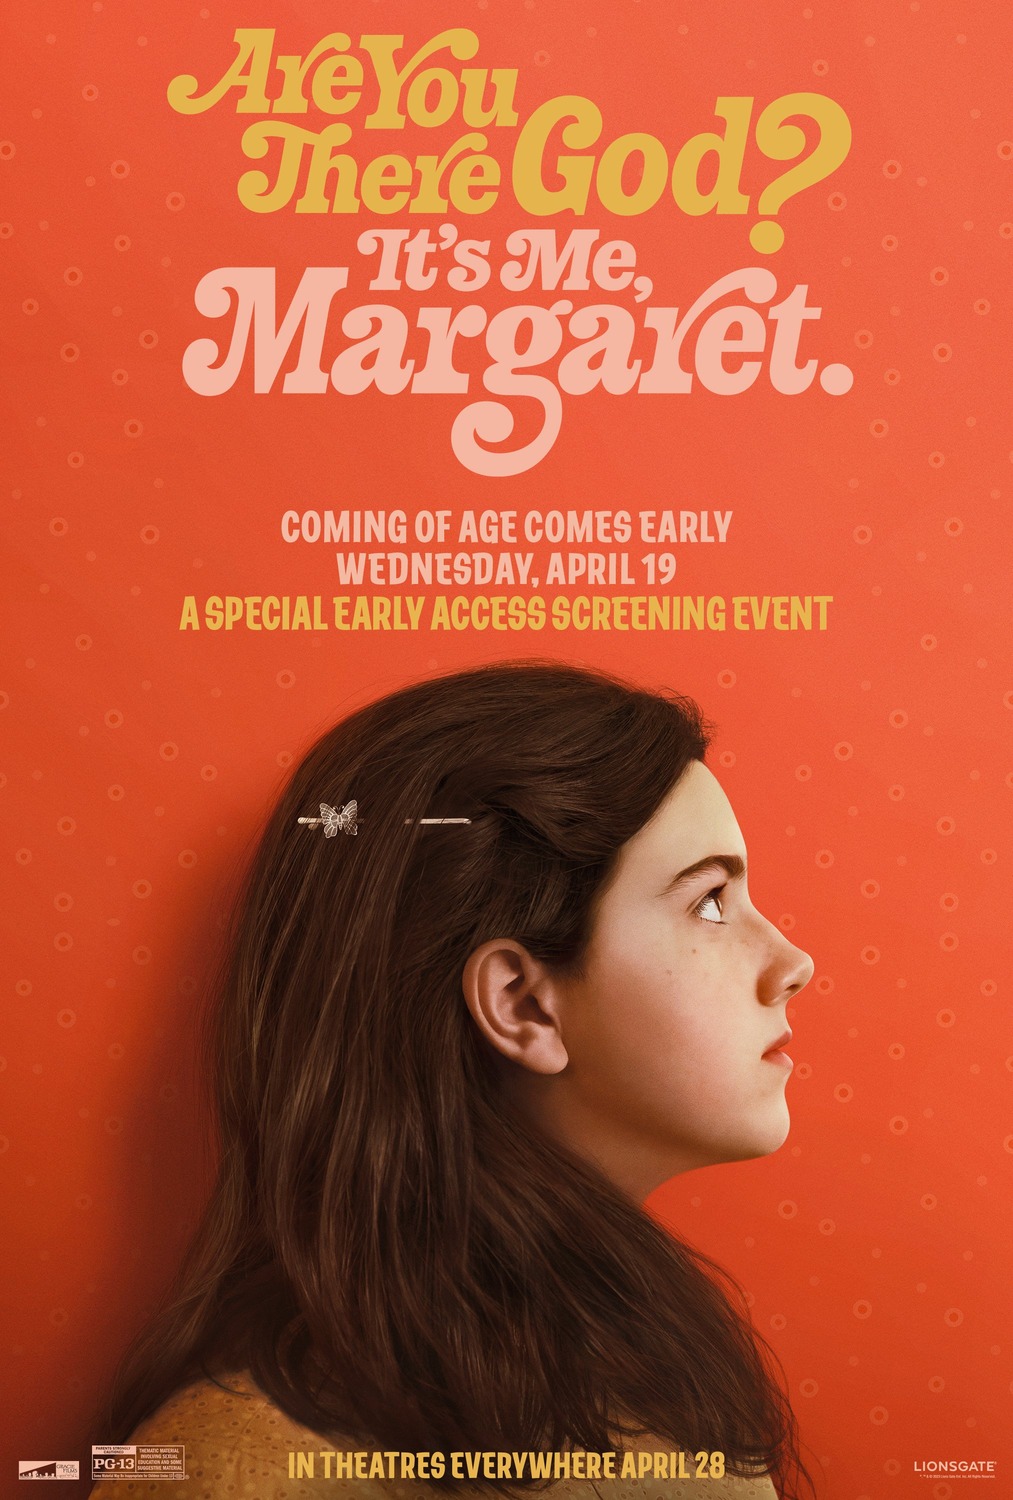 Are You There God? It’s Me, Margaret. streaming vf gratuit